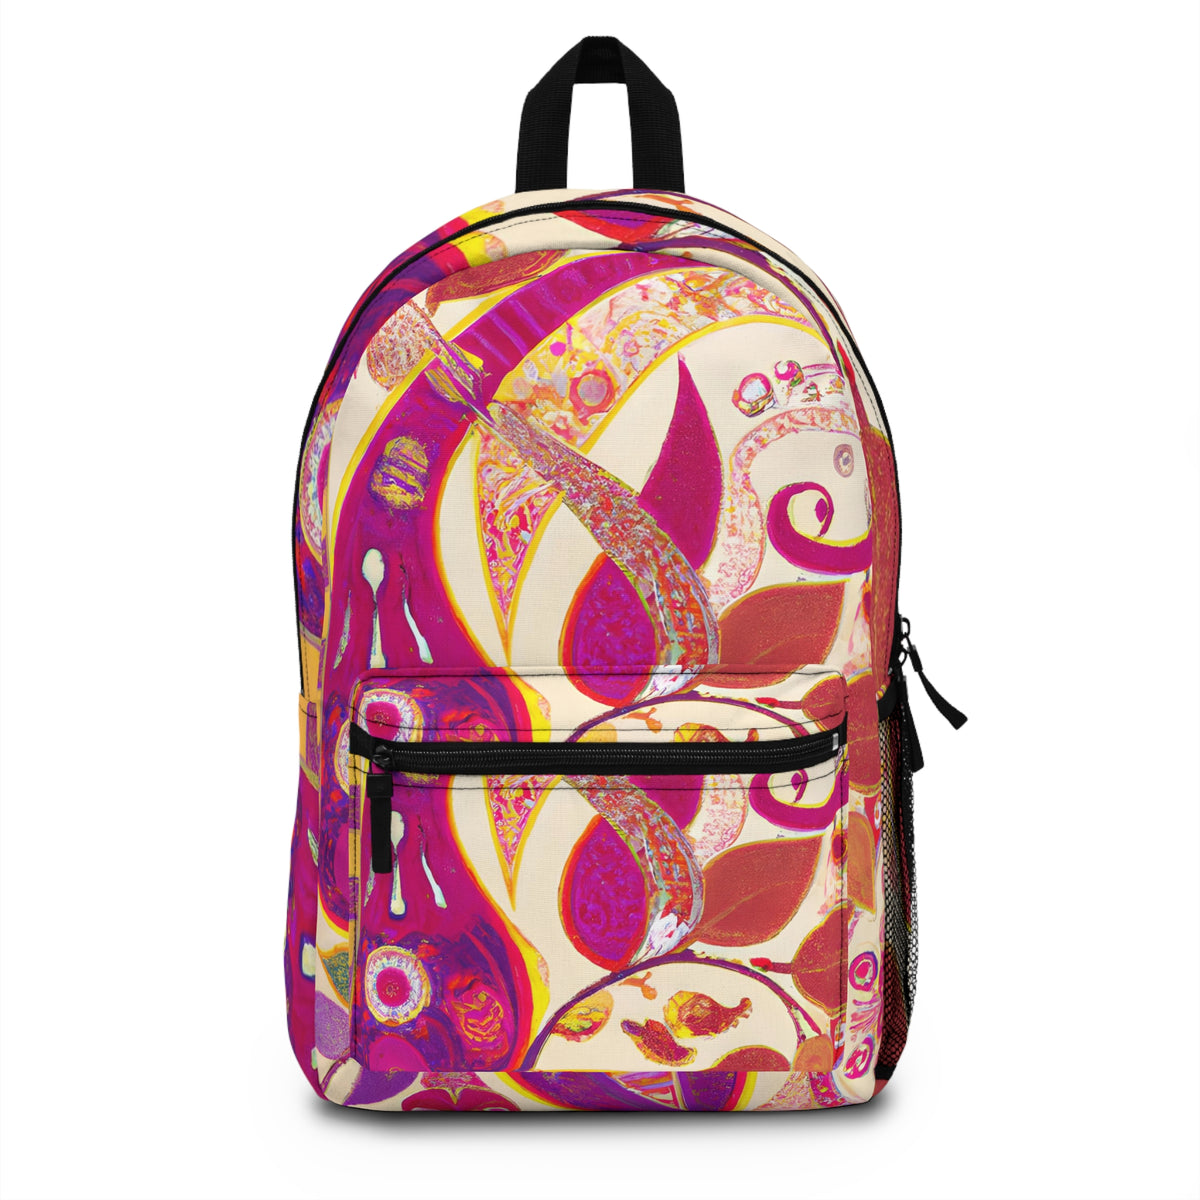 DaisyDazzler - Gay-Inspired Backpack